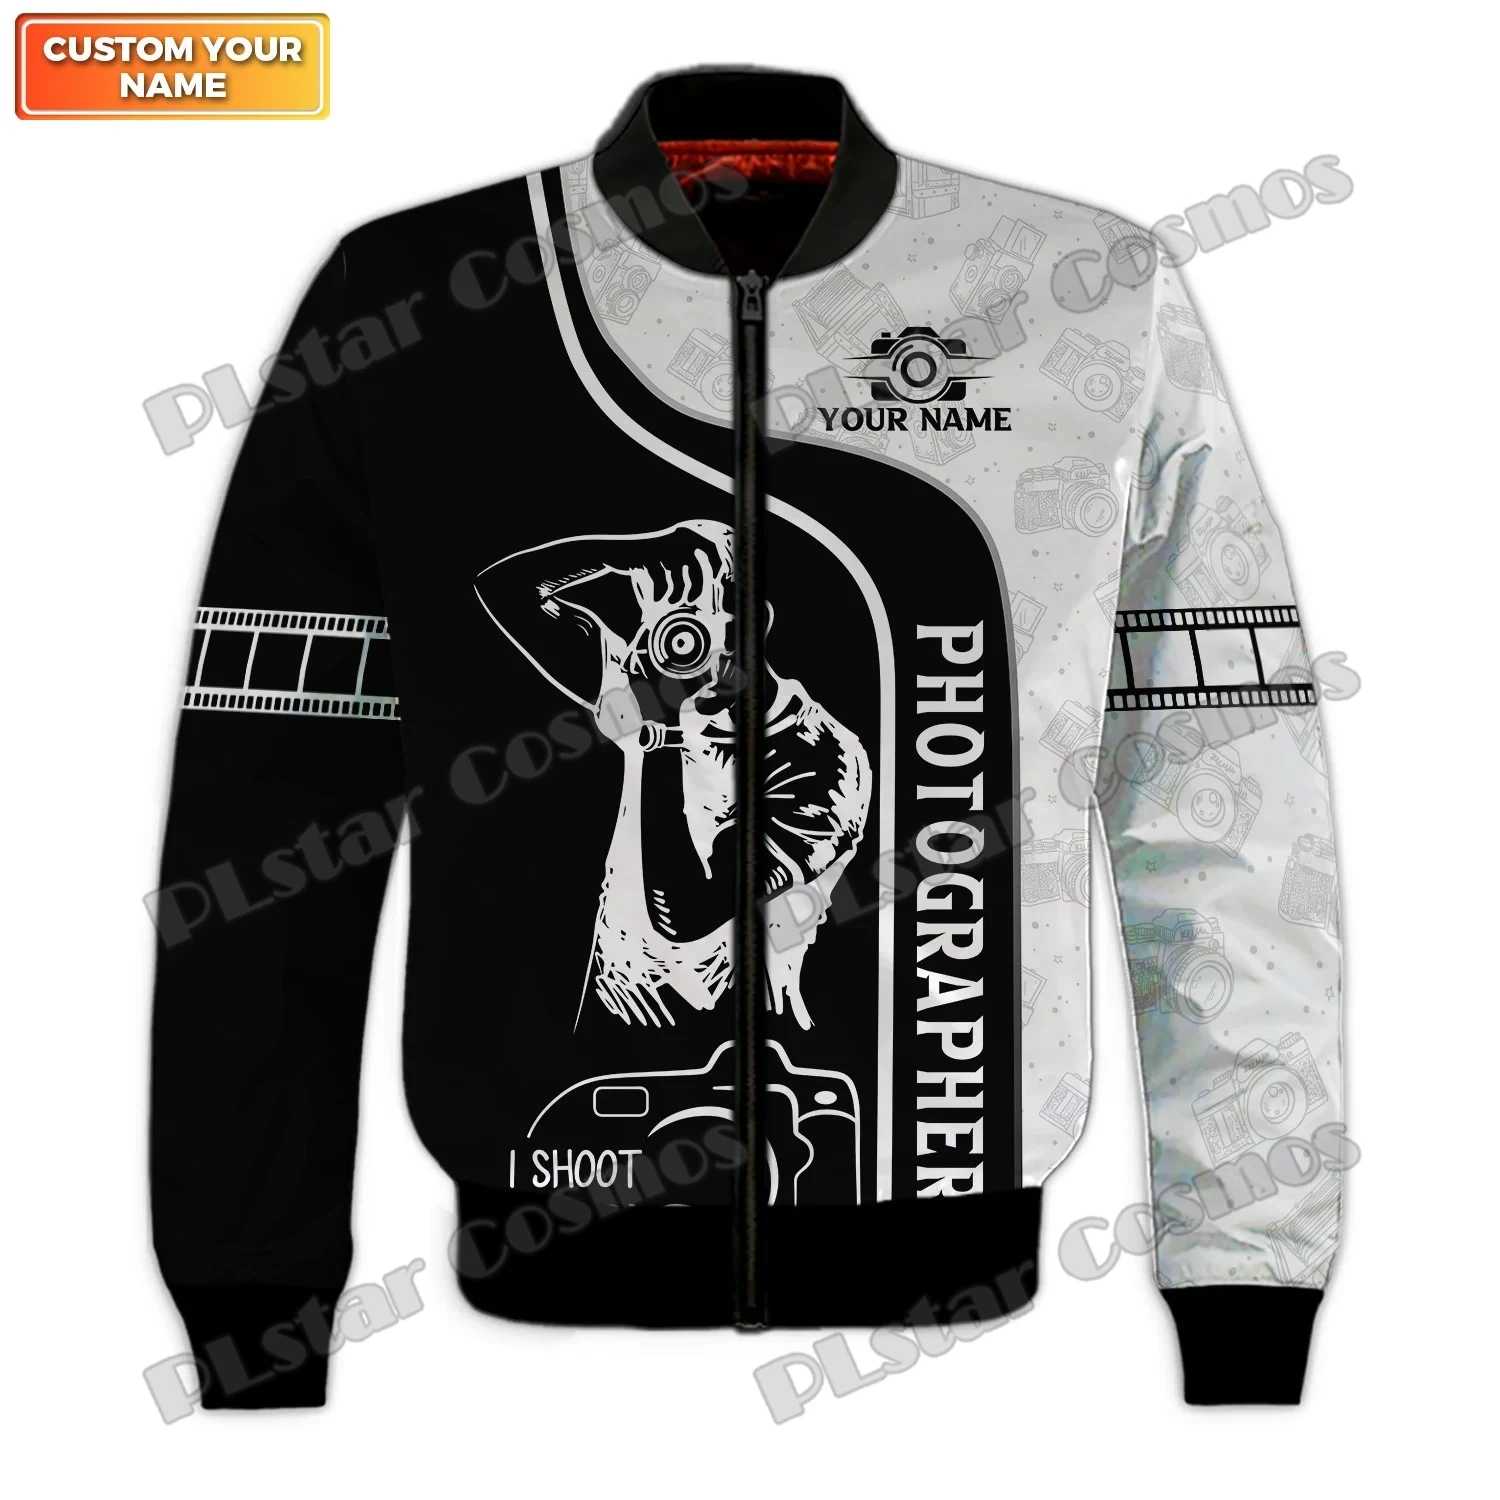 Videographer Custom Camera Tools 3D All Over Printed Men's Bomber Jackets Winter Unisex Casual warm thick Zipper Jacket FXU07 mexico coat of arms custom name 3d all over printed mens bomber jackets winter unisex casual harajuku zipper jacket coat fjk01